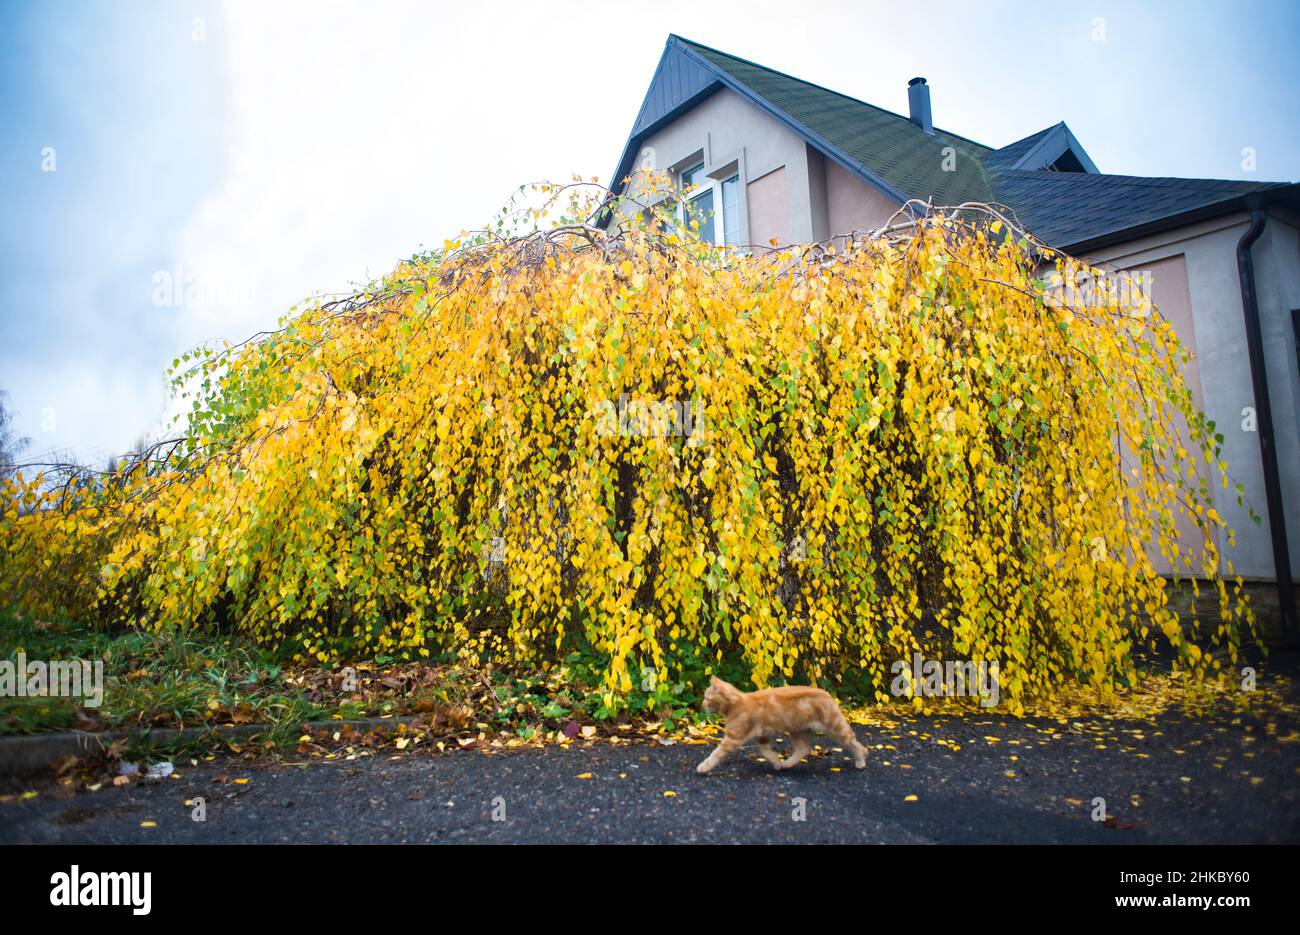 Yellow decorative dwarf birch tree in the urban landscape, with a red cat at the front Stock Photo